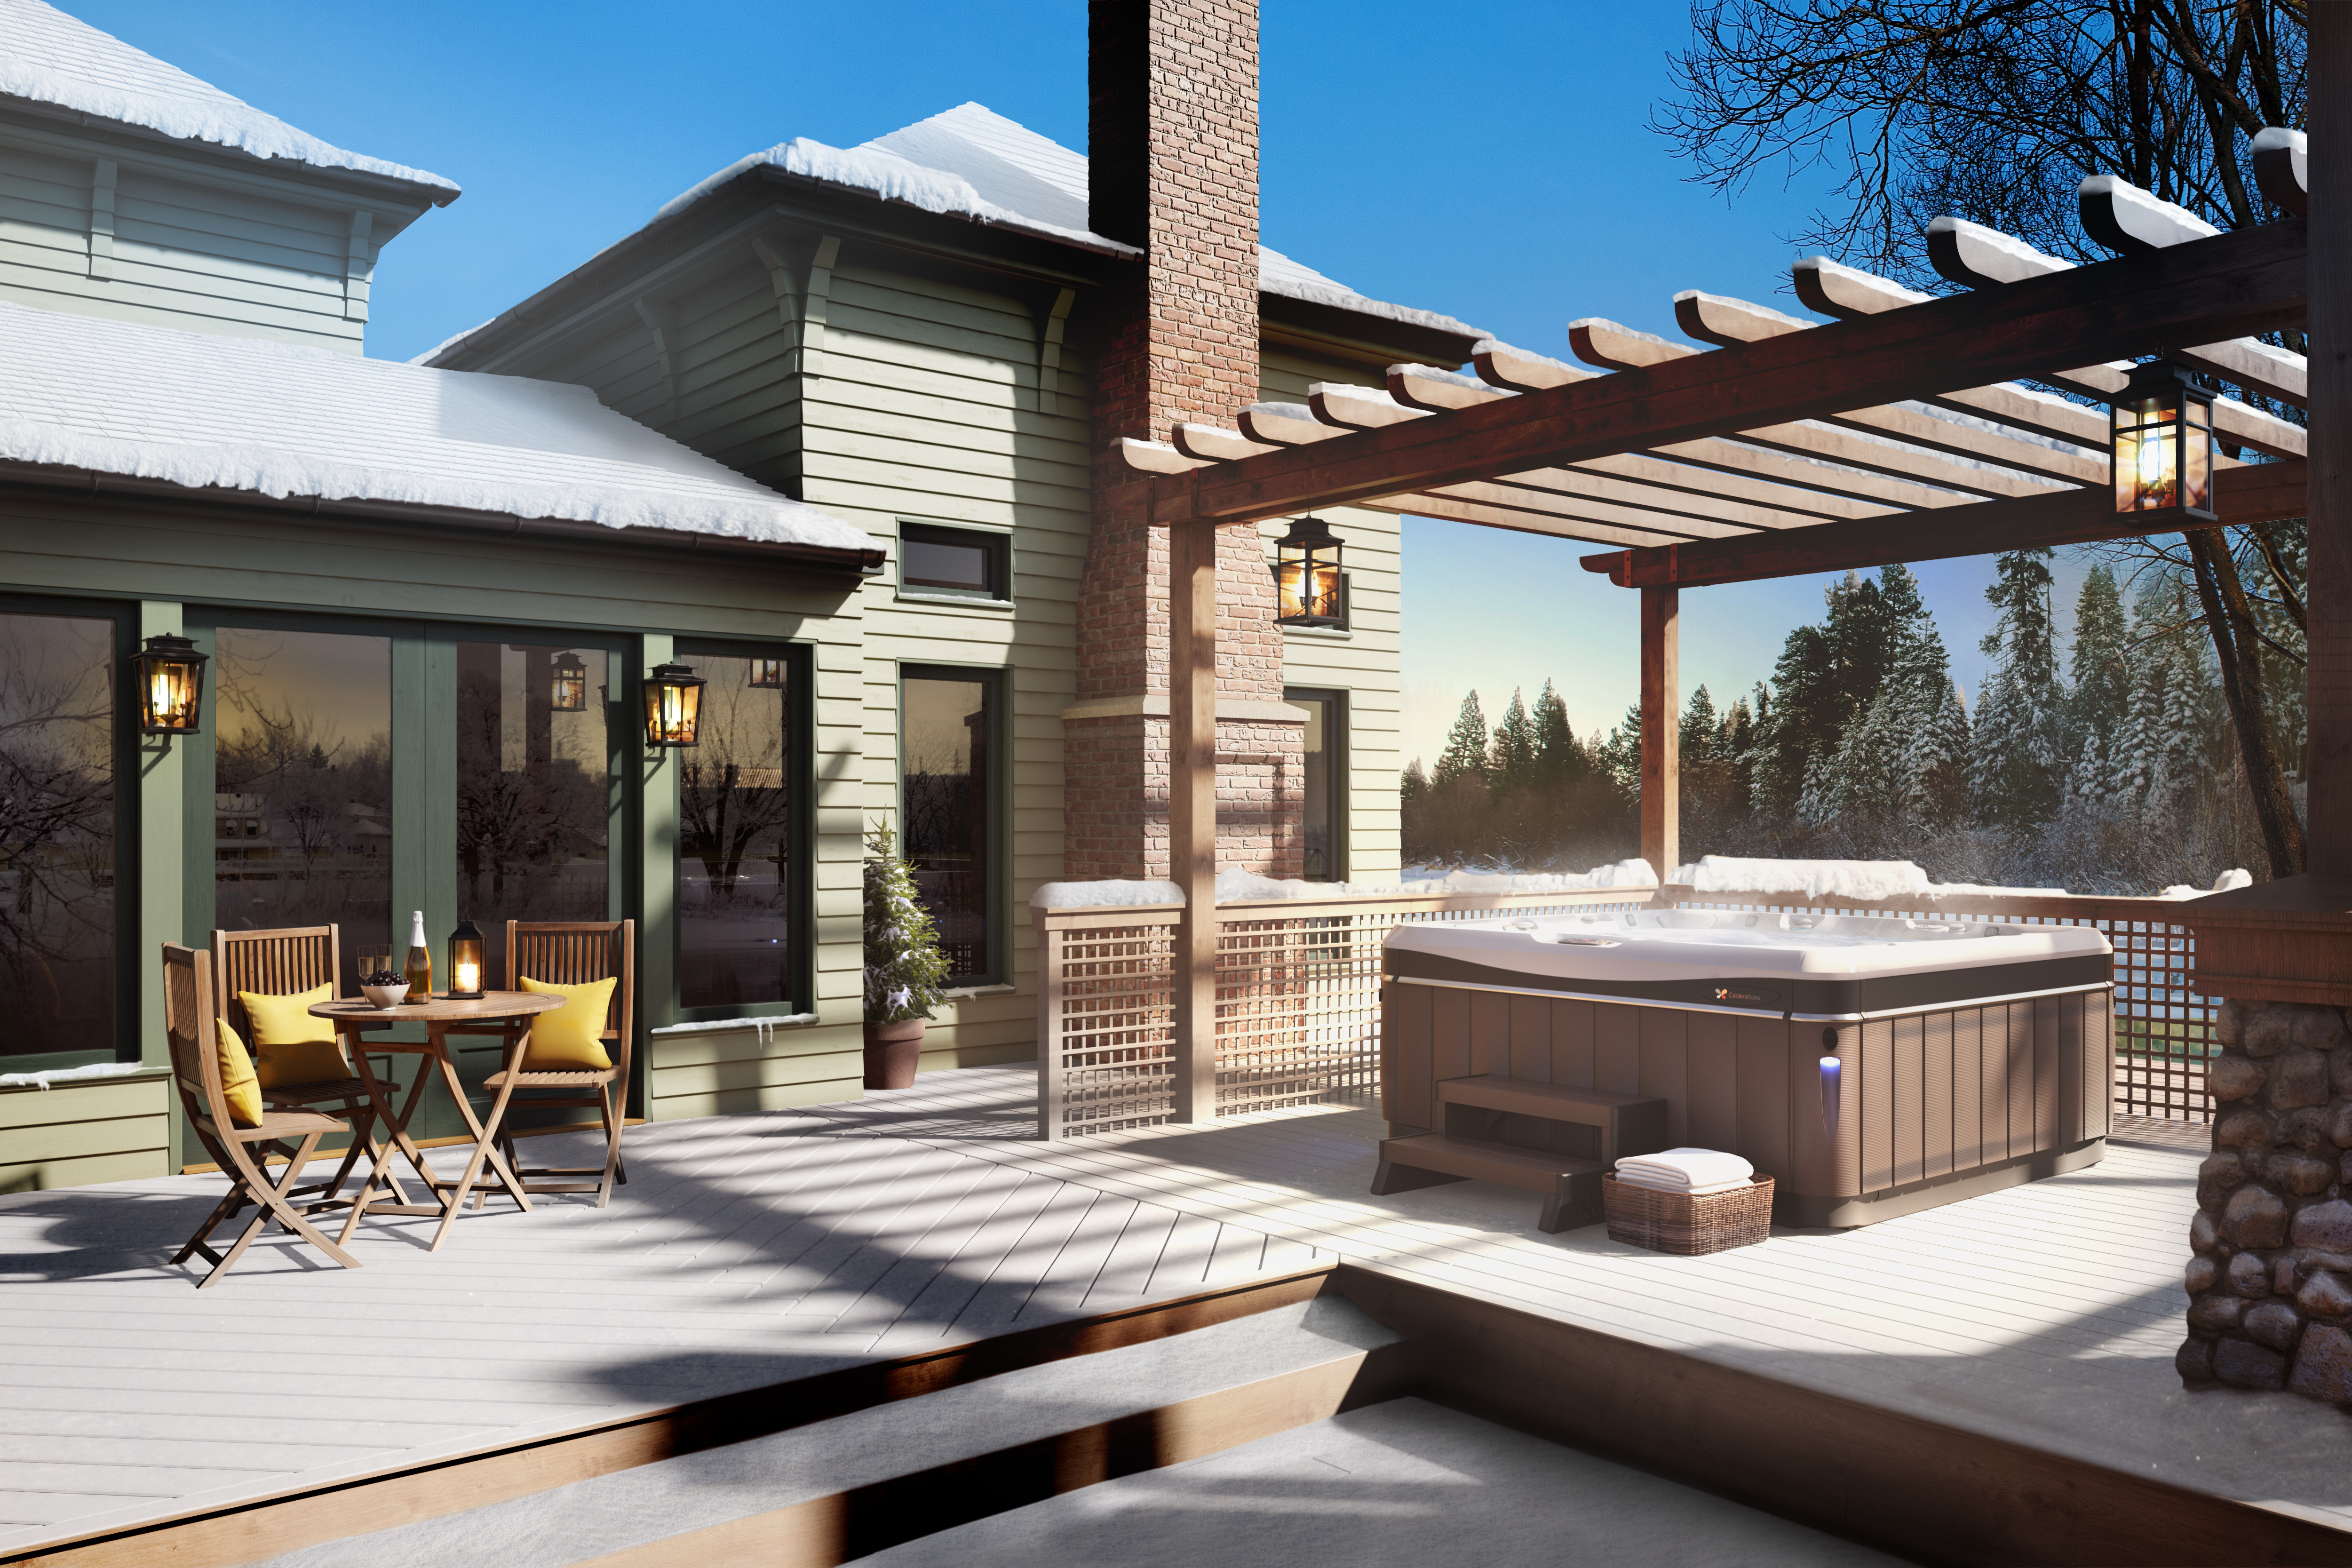 A relaxing Caldera Spa hot tub steaming on a wooden deck in winter. Snow surrounds the deck, creating a cozy ambiance.